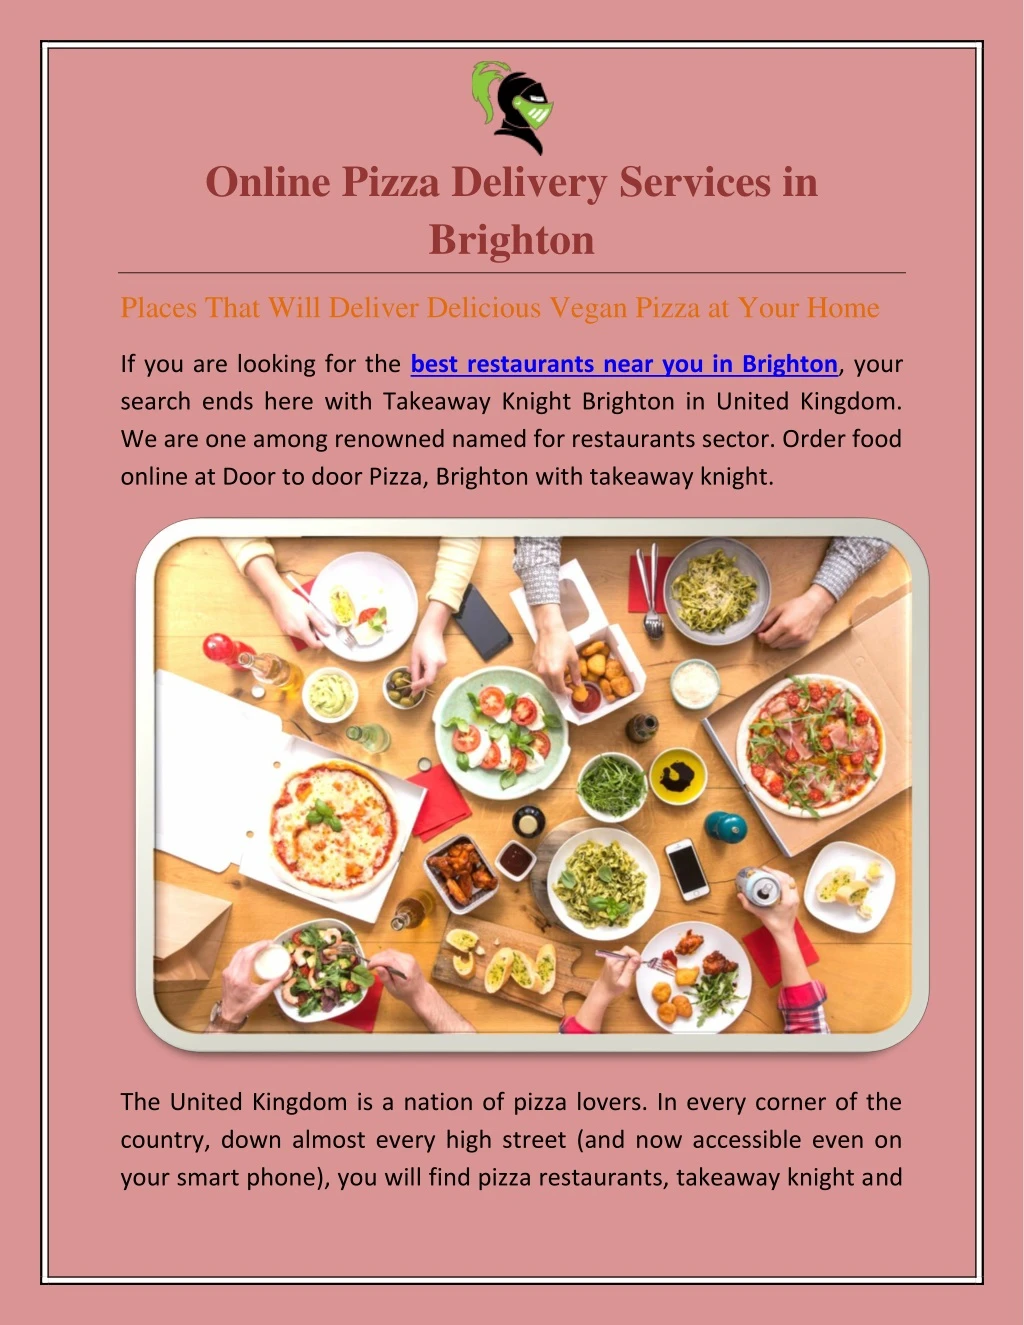 online pizza delivery services in brighton